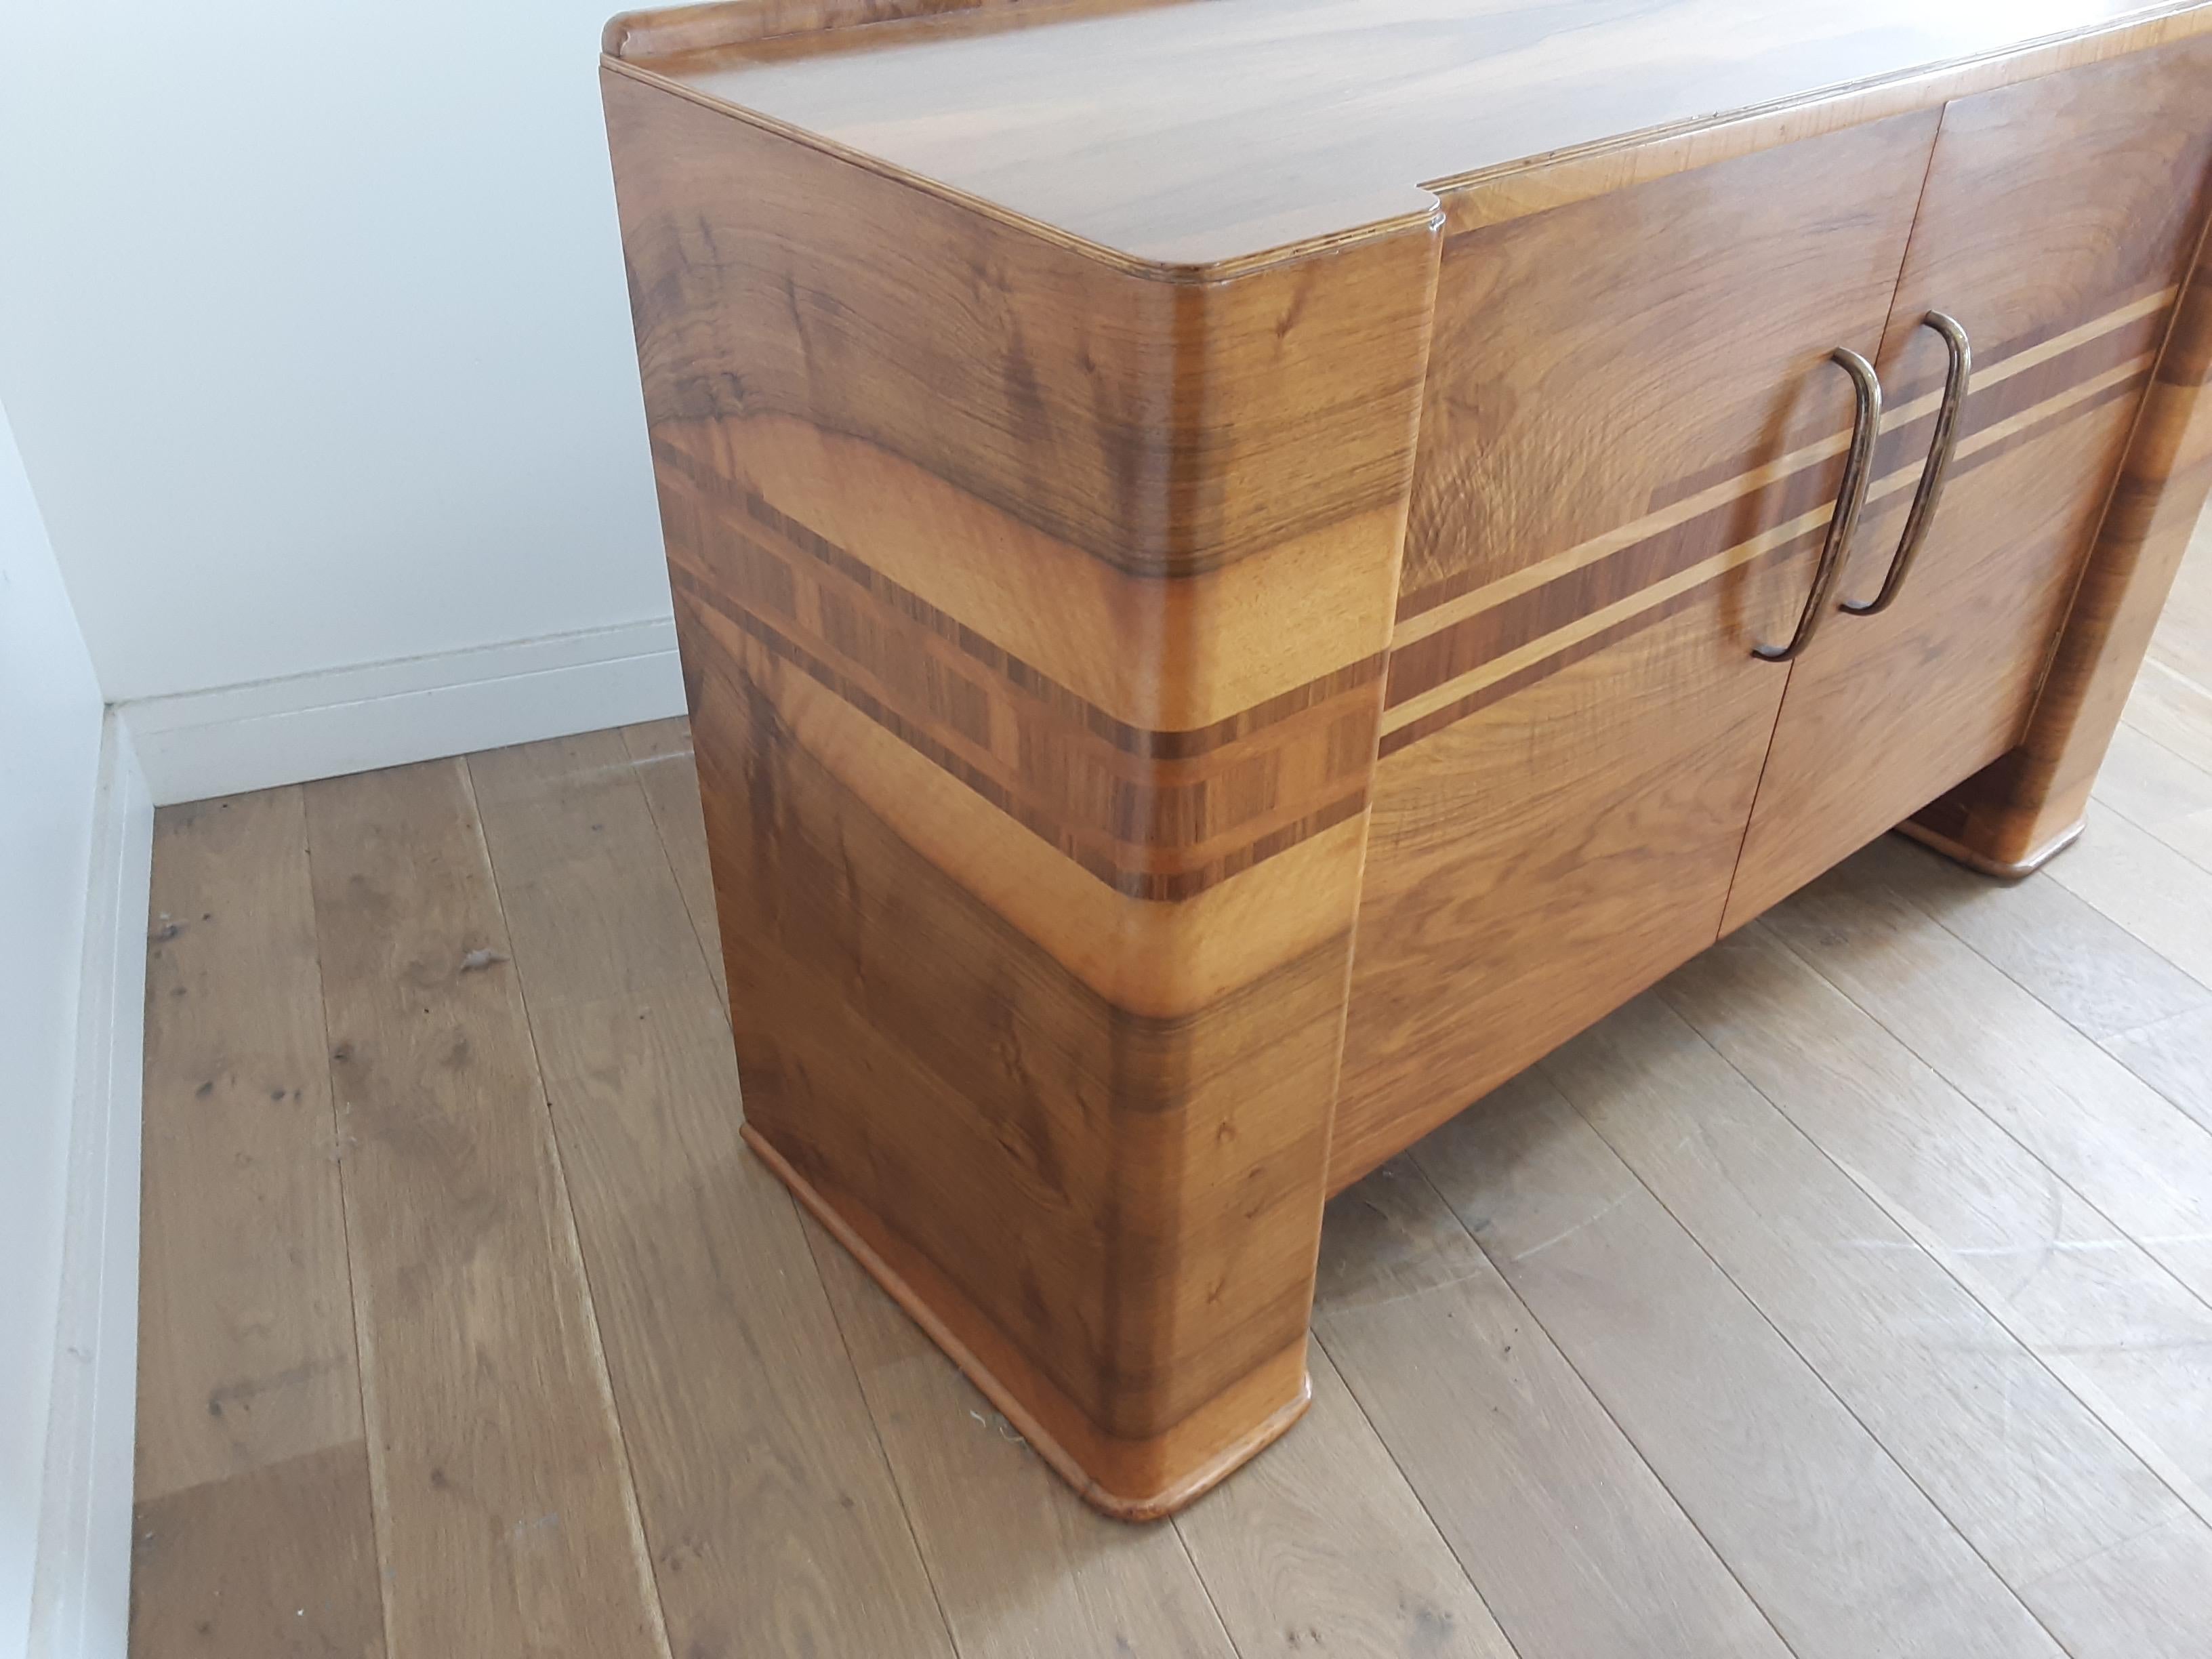 Scottish Art Deco Sideboard in a Golden Brown Walnut with a Modernist Design For Sale 1